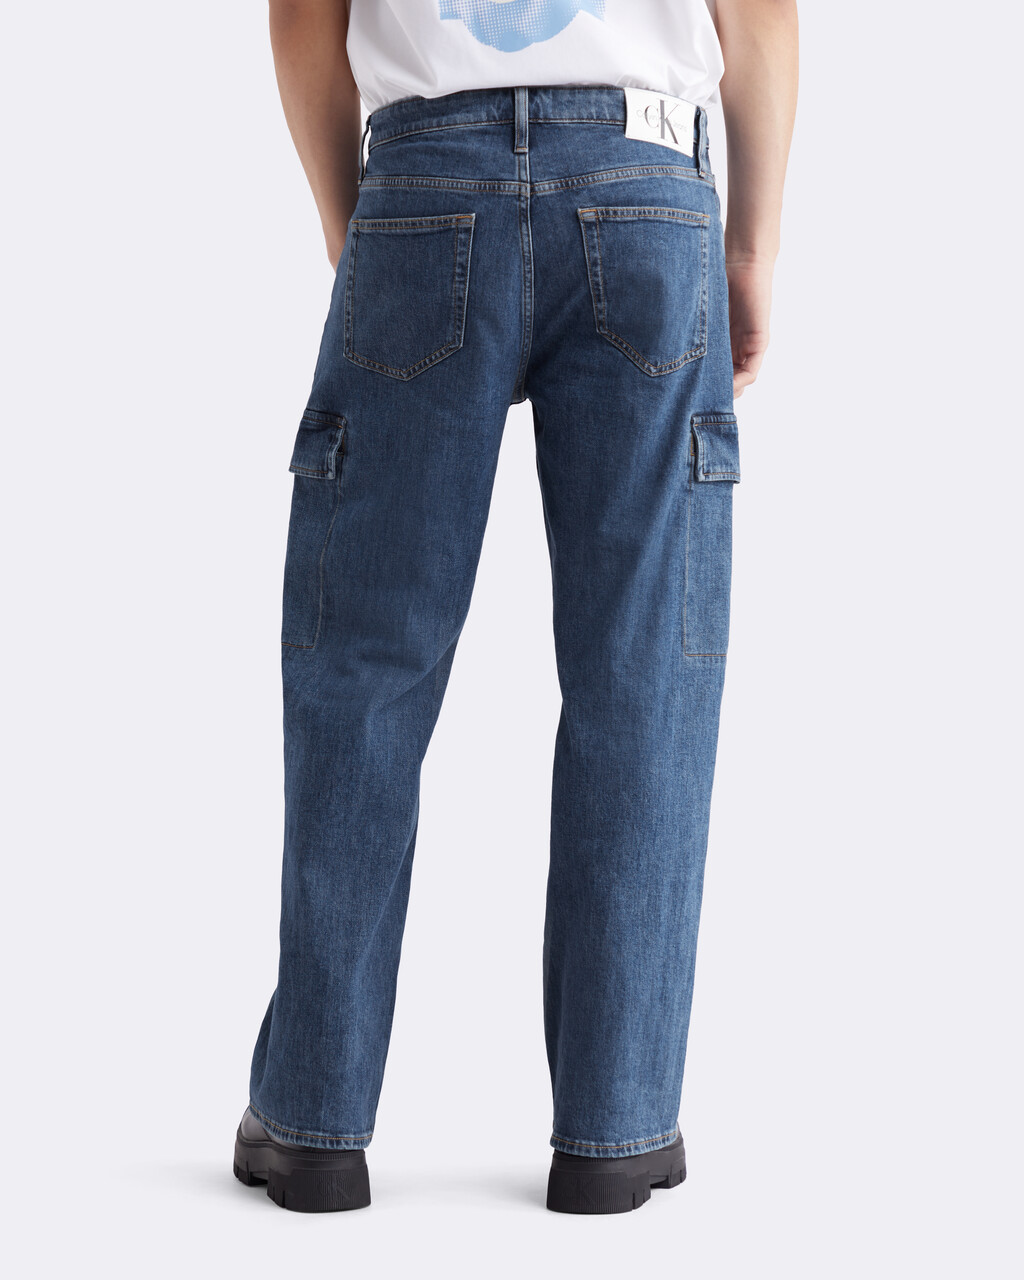 90s Loose Cargo Jeans, 051 MID BLUE, hi-res